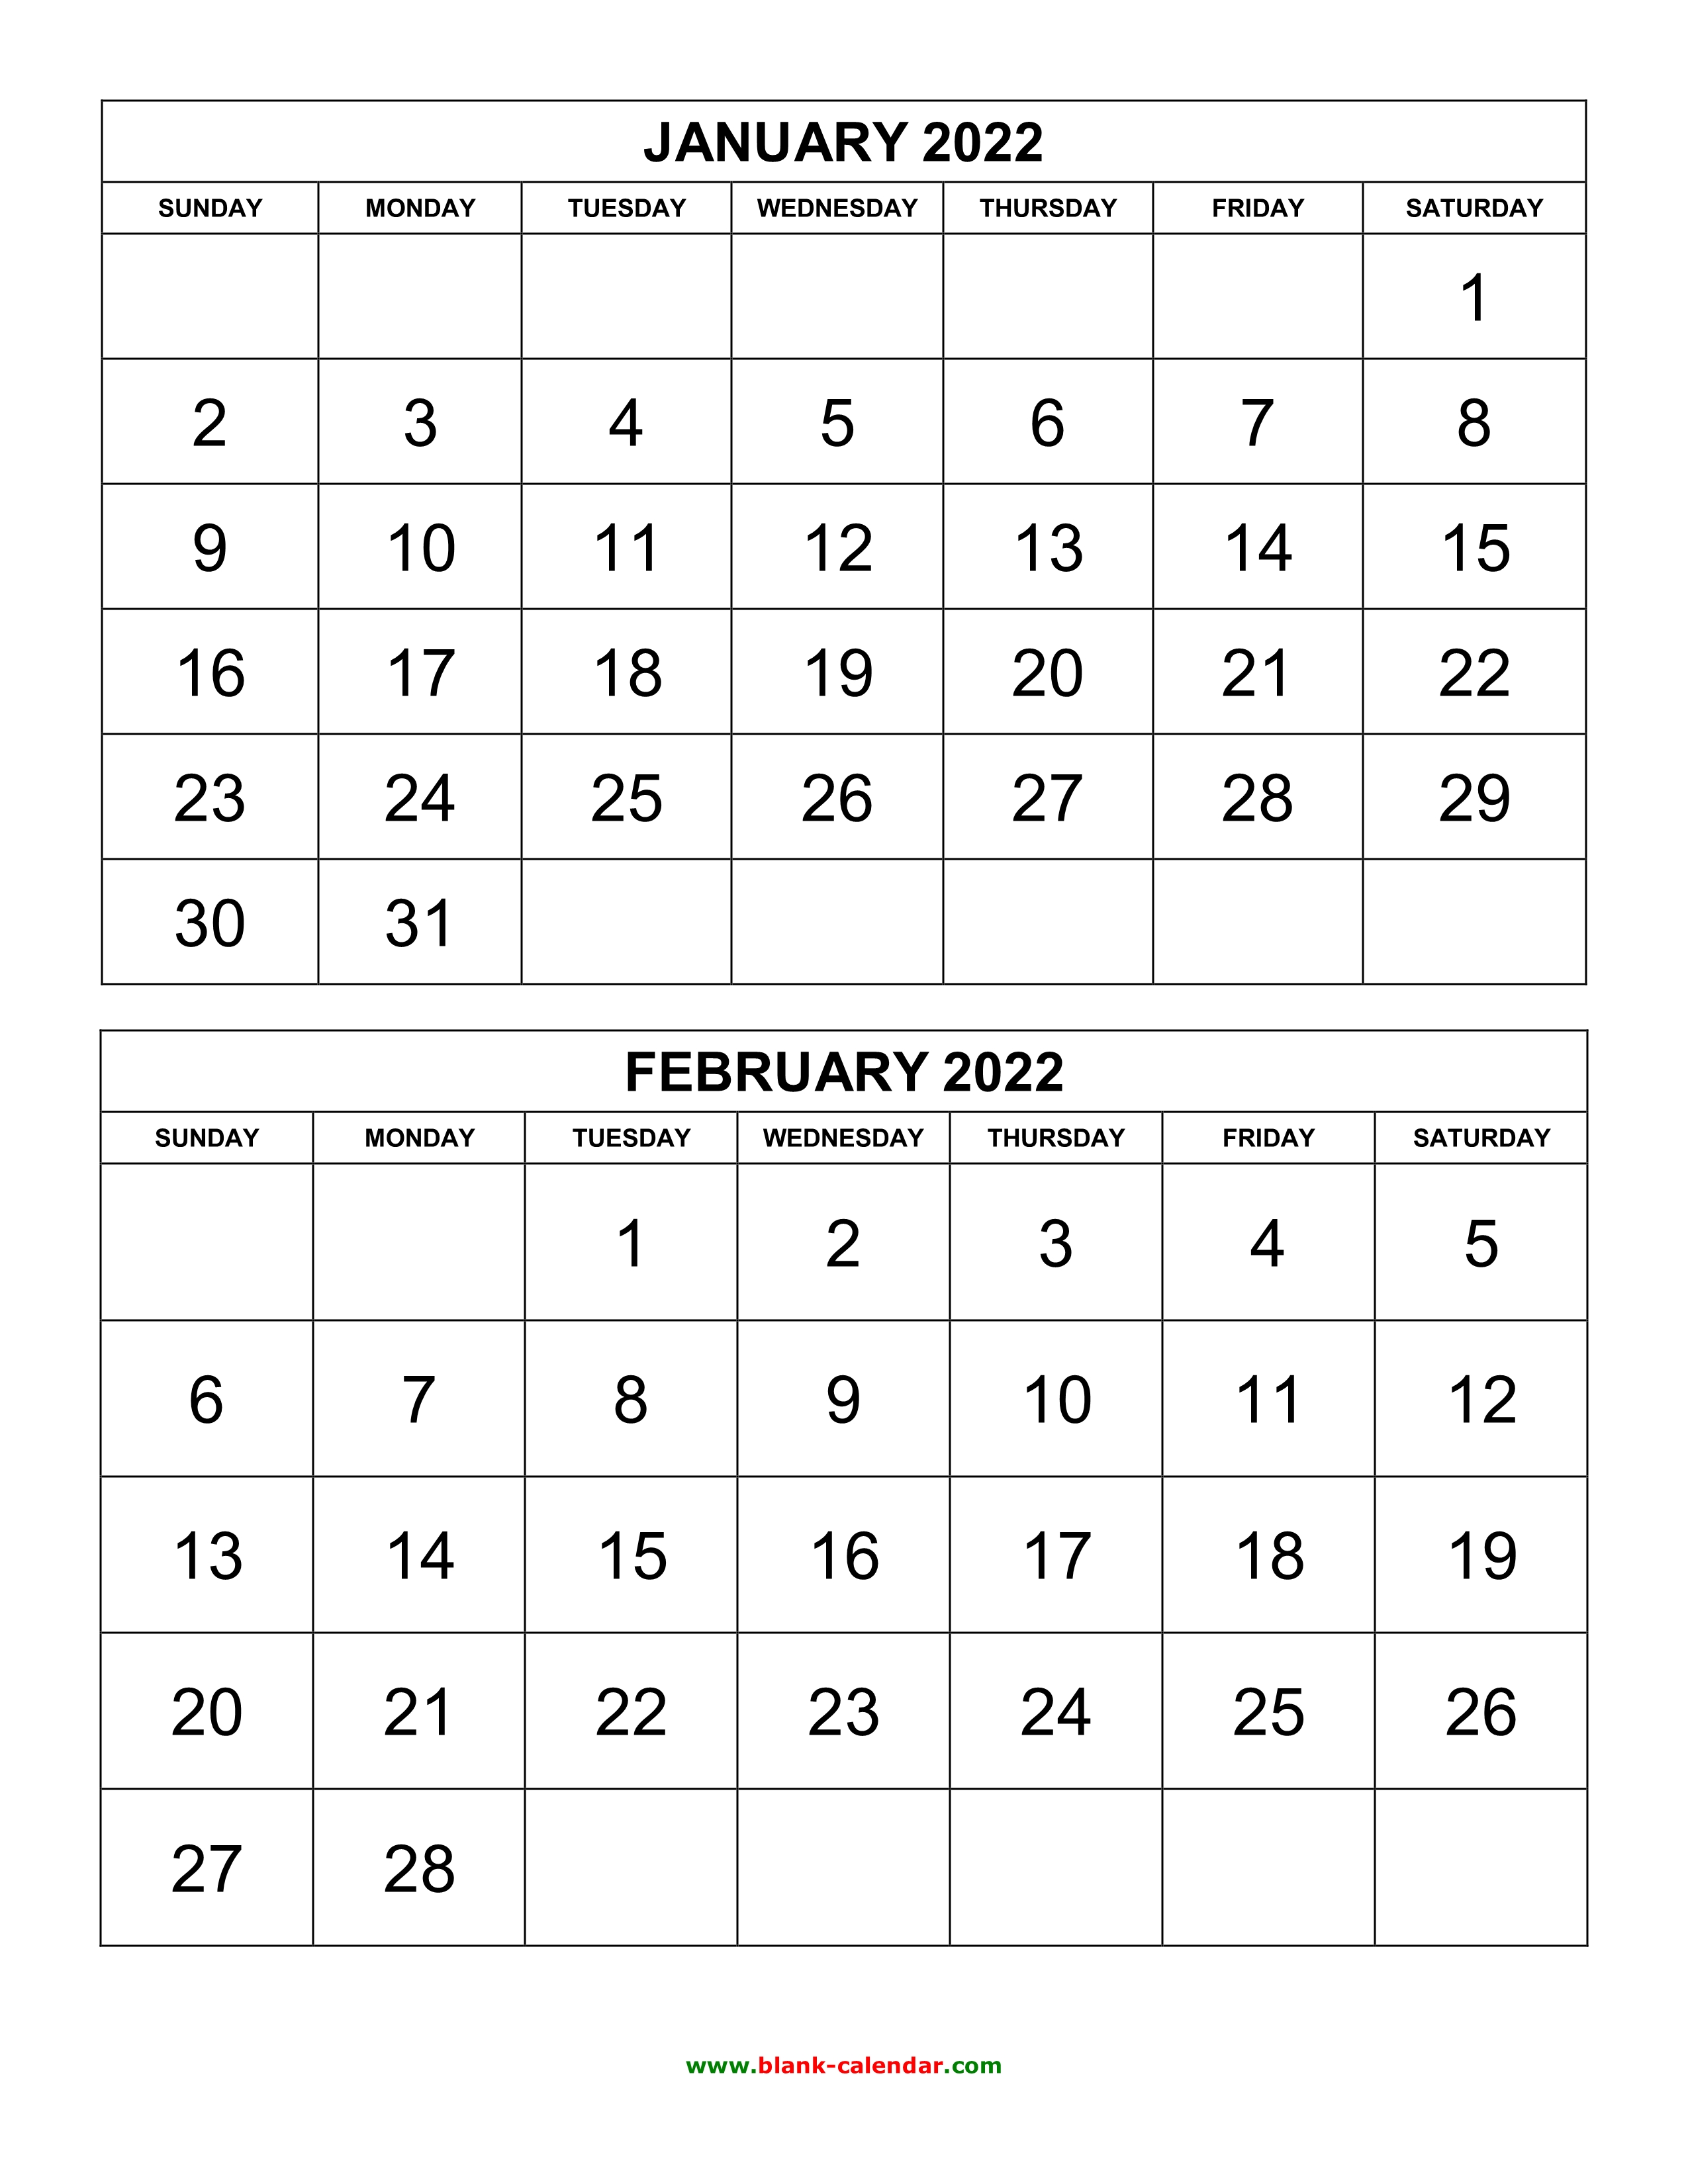 49-2-page-monthly-calendar-2022-printable-free-images-all-in-here